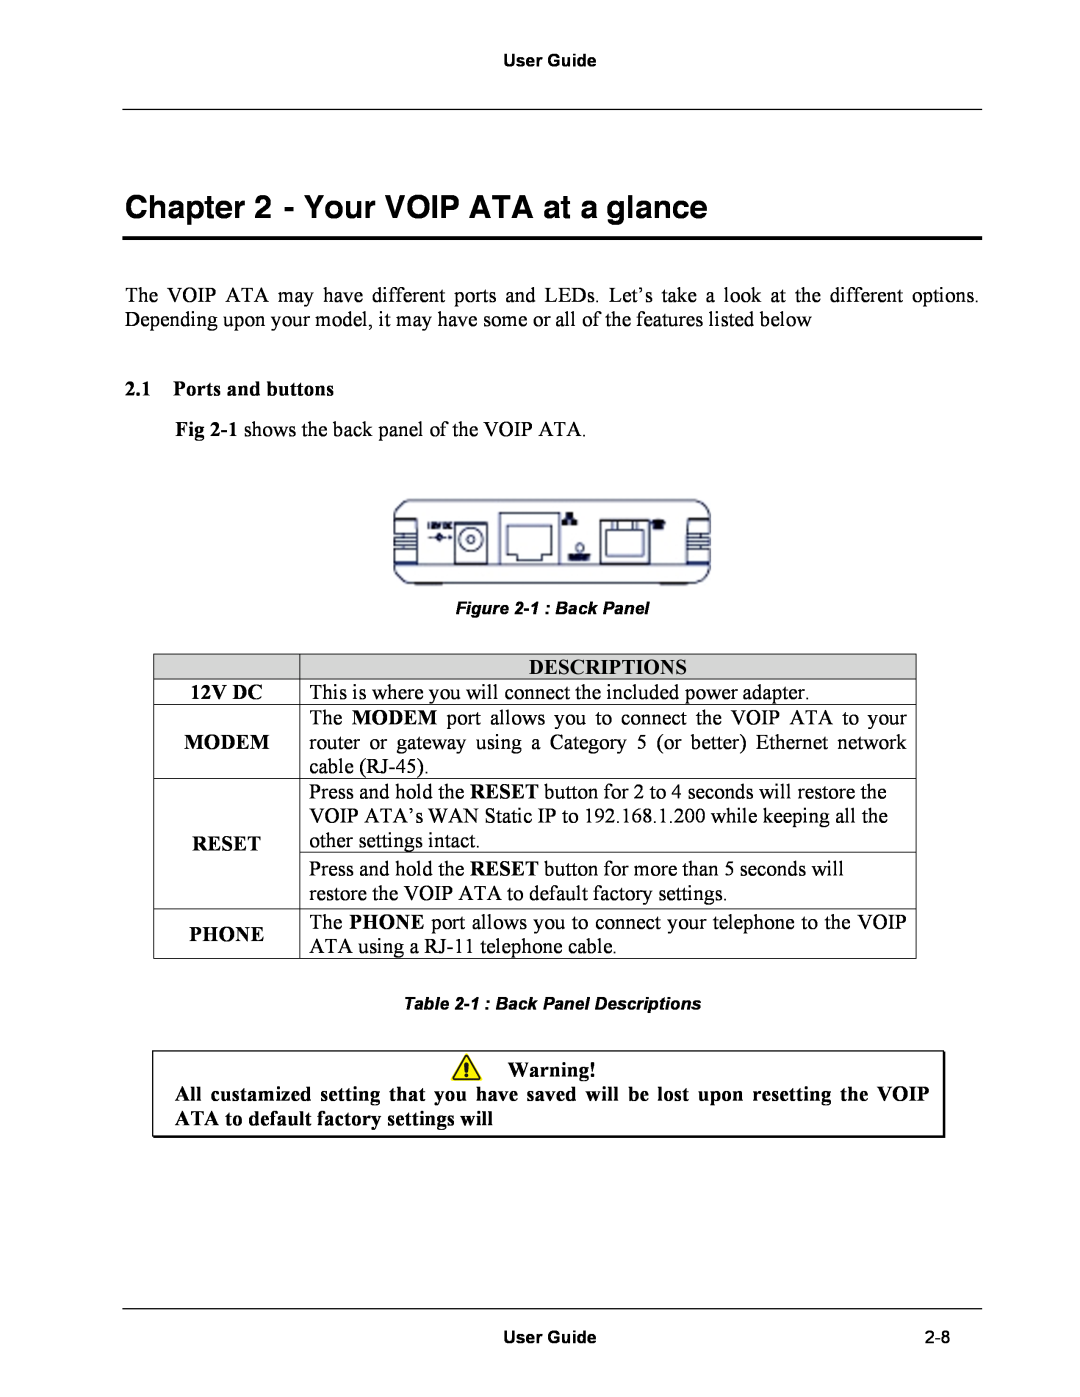 Netopia Network Adapater manual Your VOIP ATA at a glance, Ports and buttons, Descriptions, 12V DC, Reset, Phone 